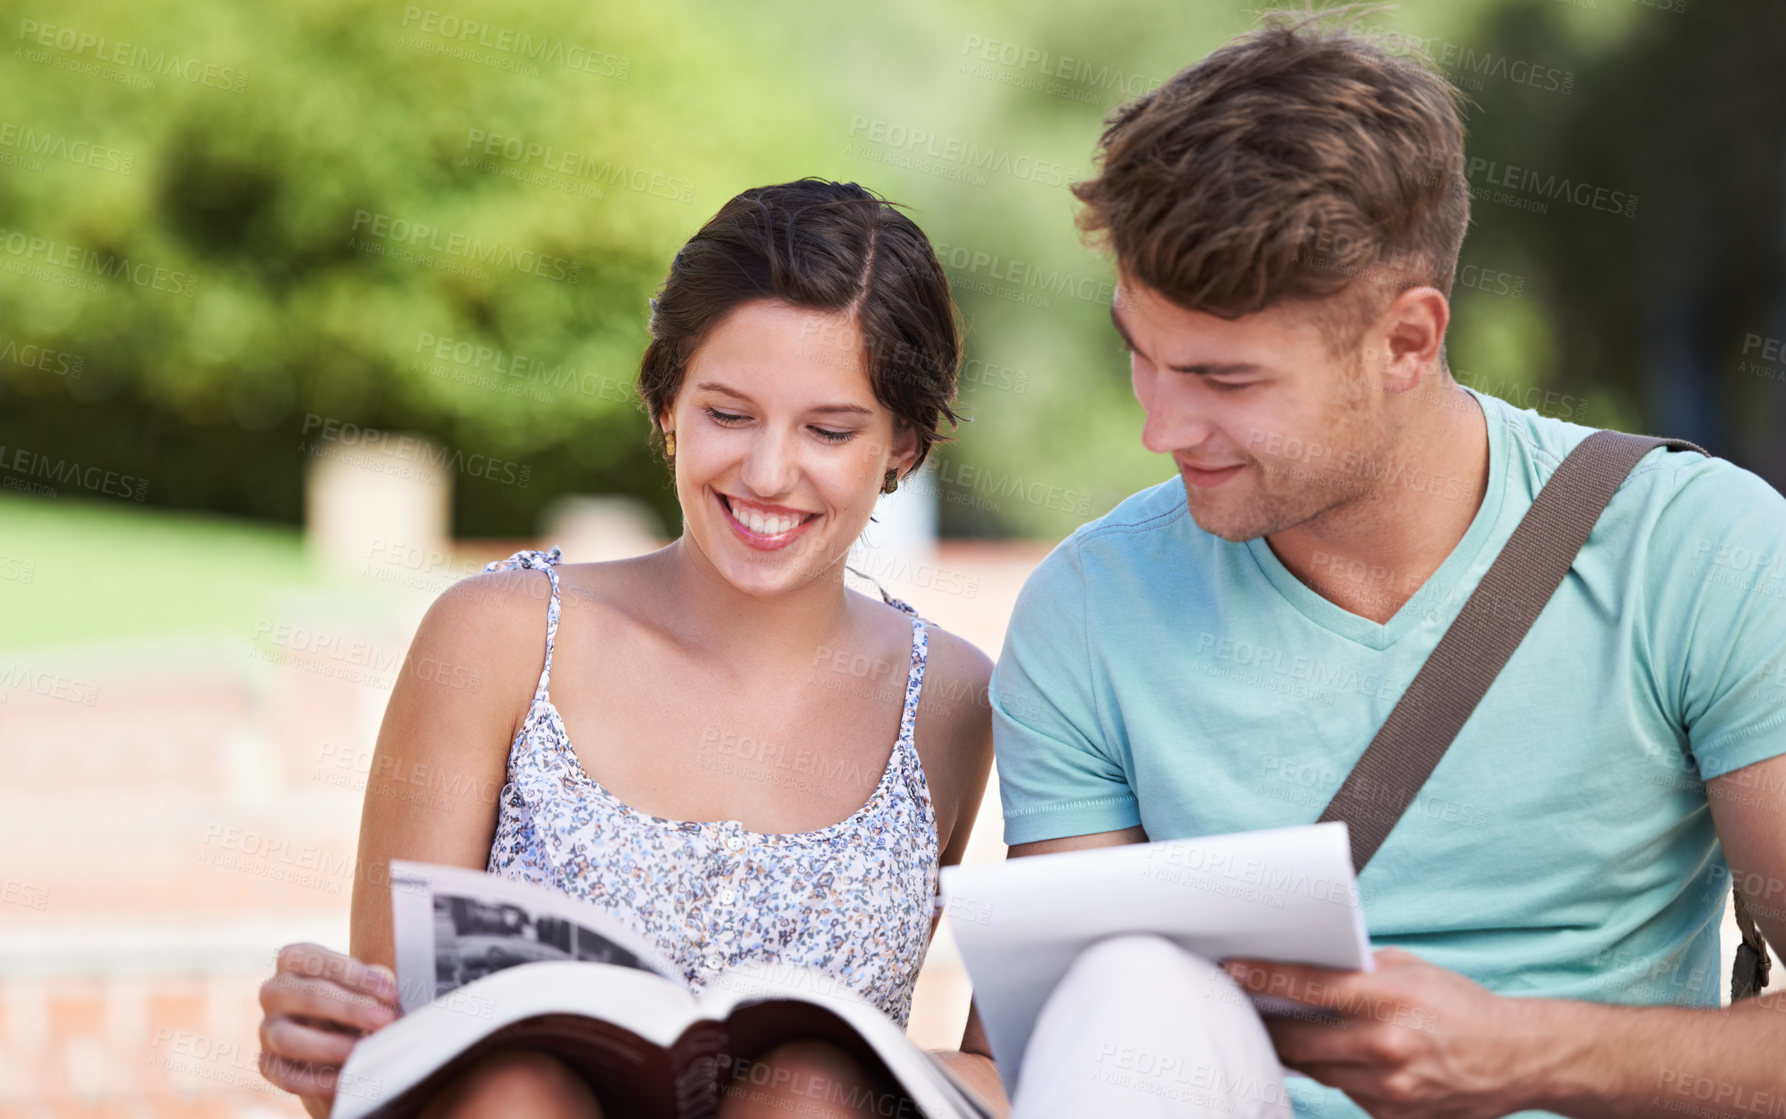 Buy stock photo A young couple in college sitting together and studying in the park